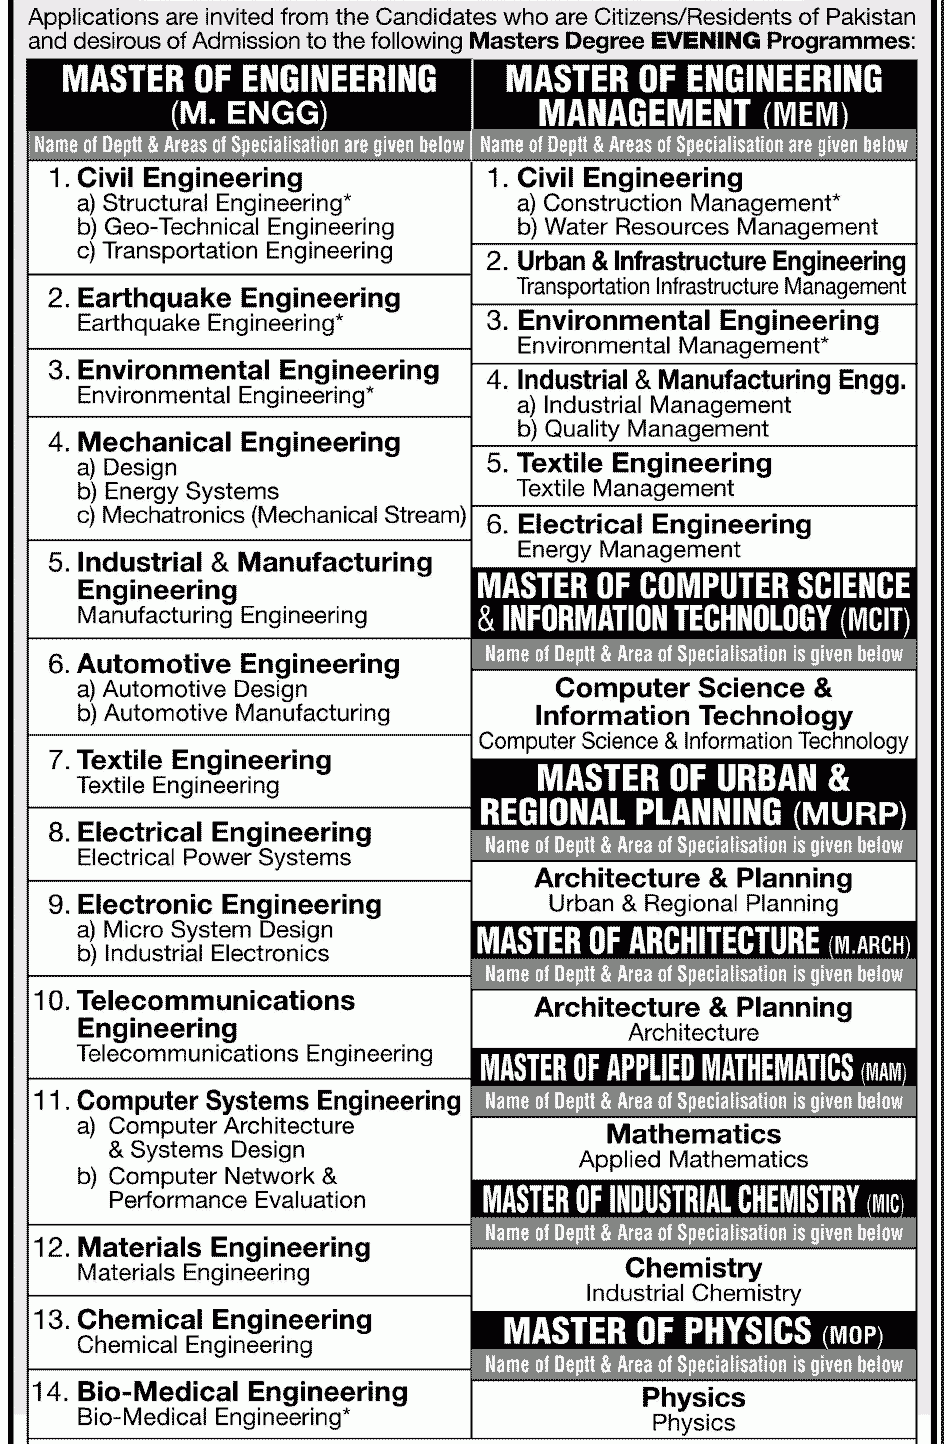 NED UET Admission Notice for Master Degree Programmes 2019